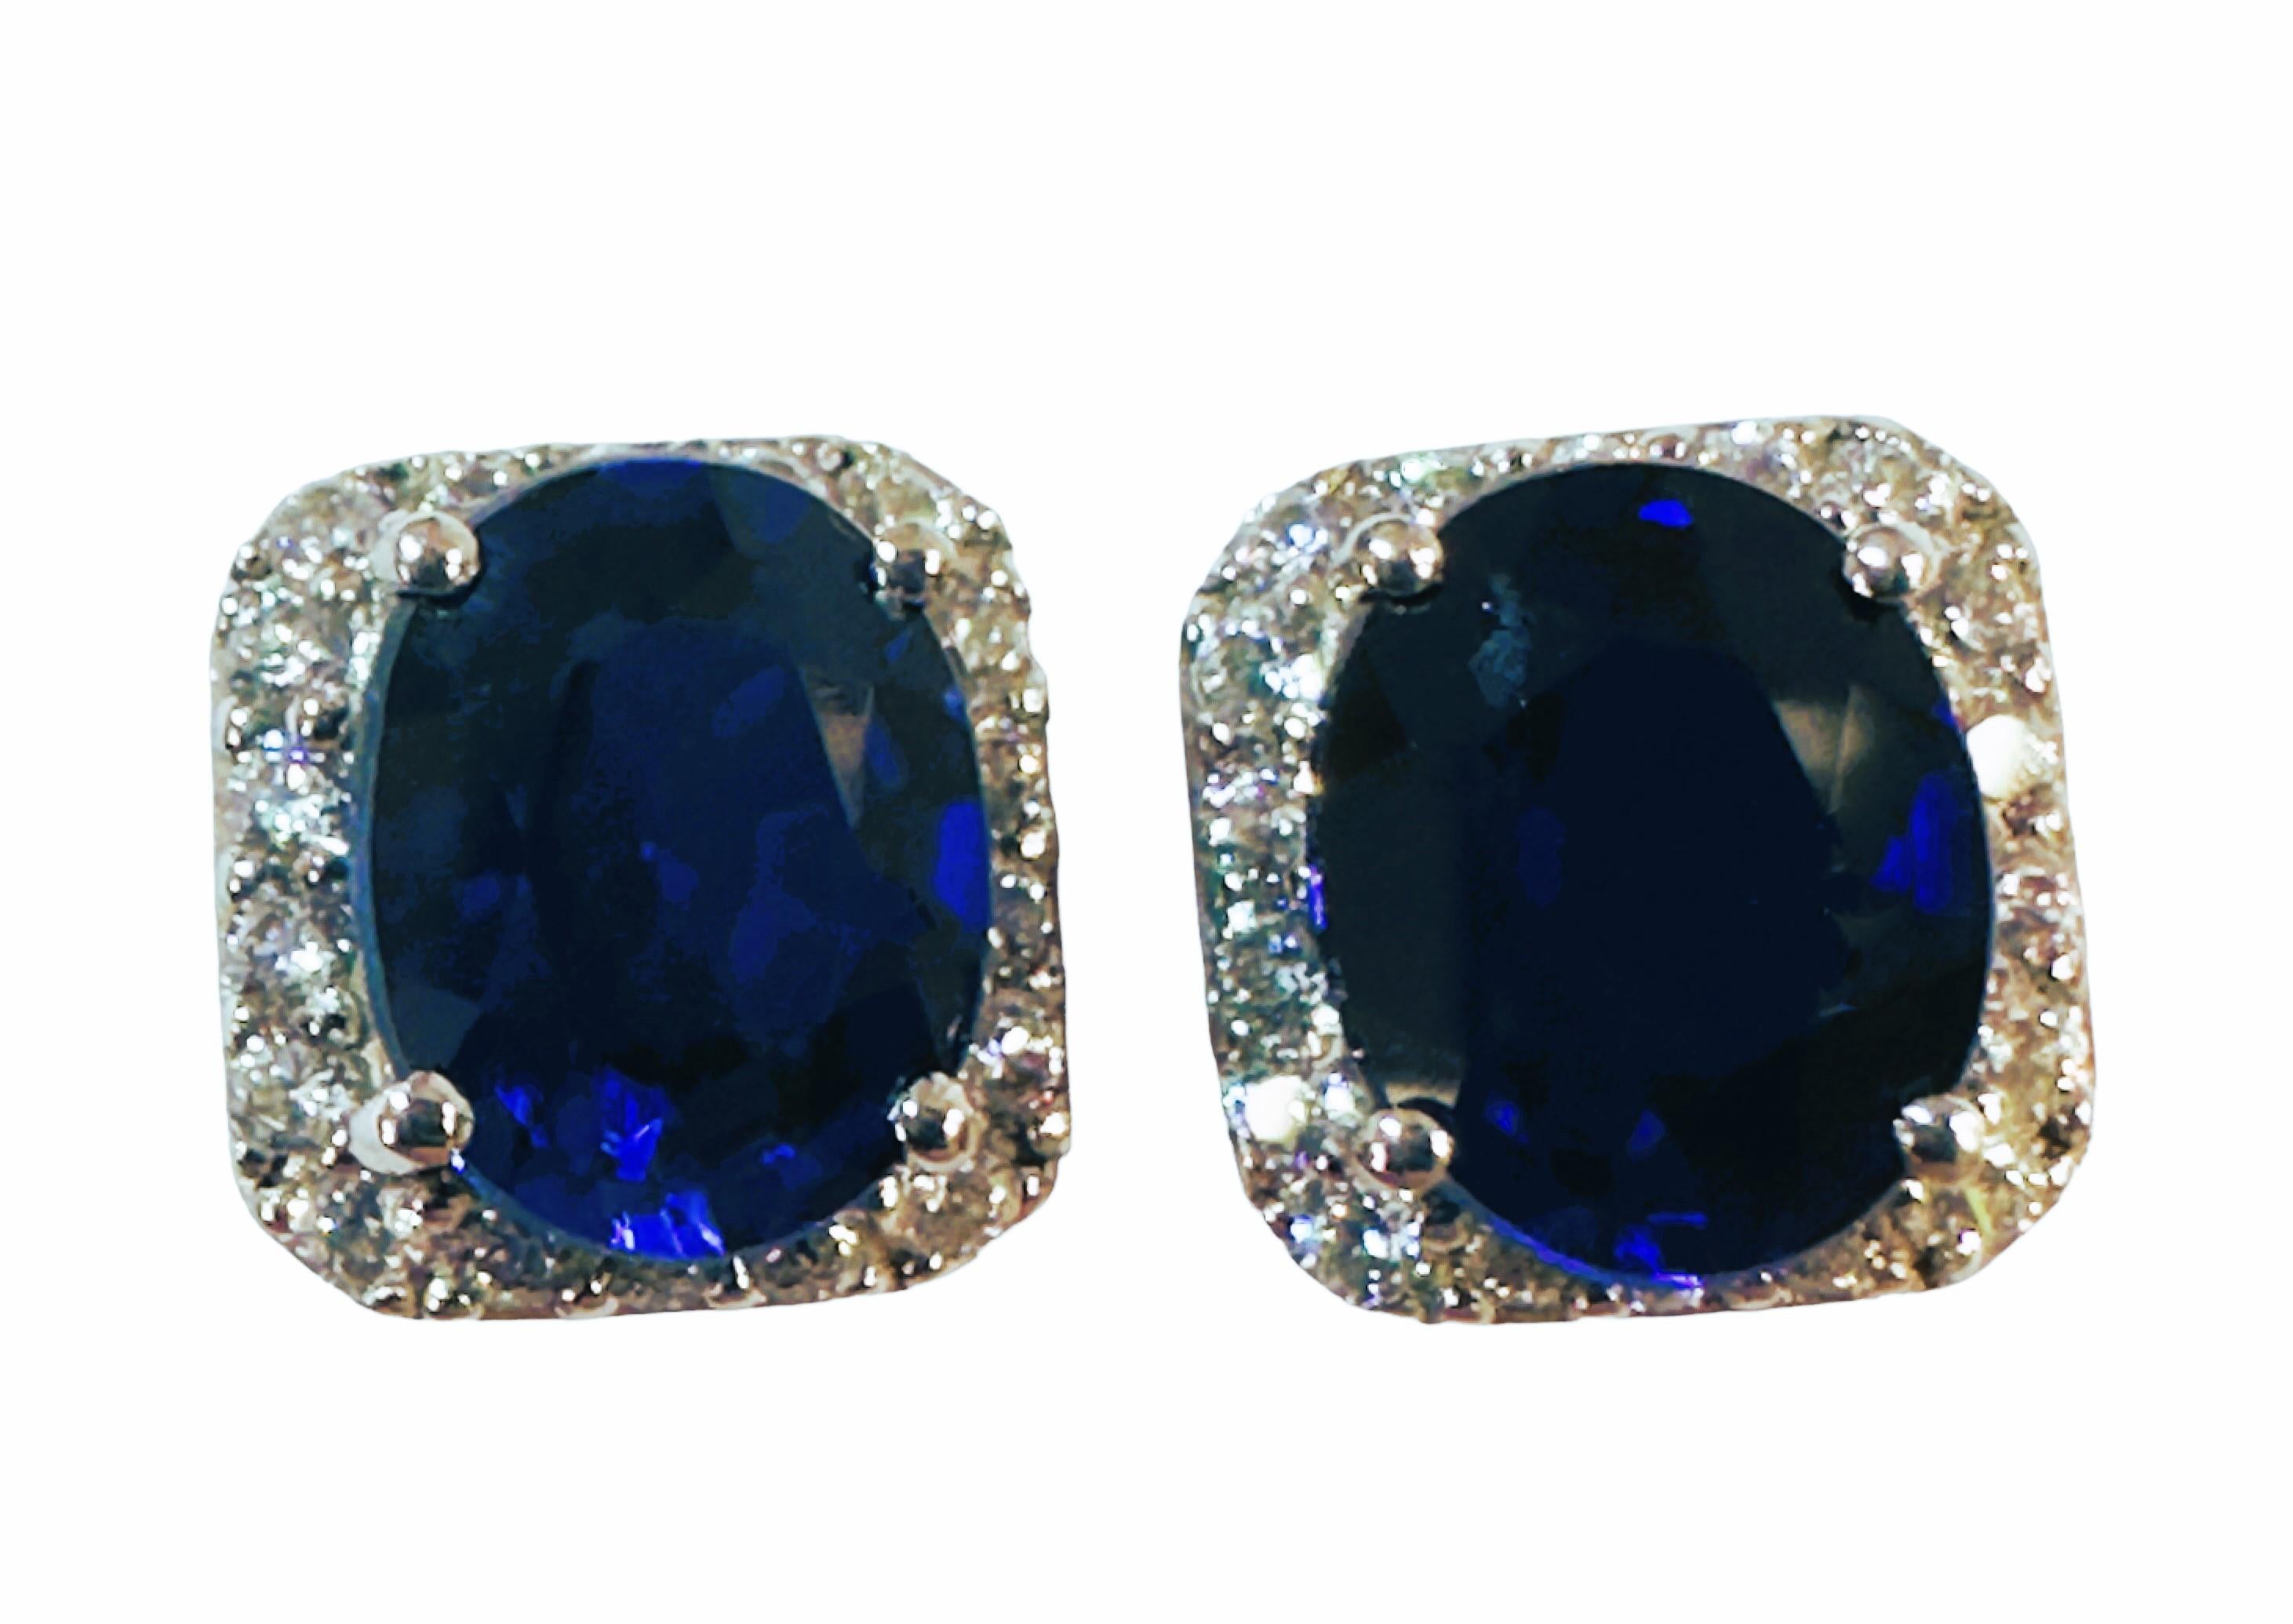 Oval Cut New African 4.10 ct Deep Blue Sapphire Sterling Post Earrings